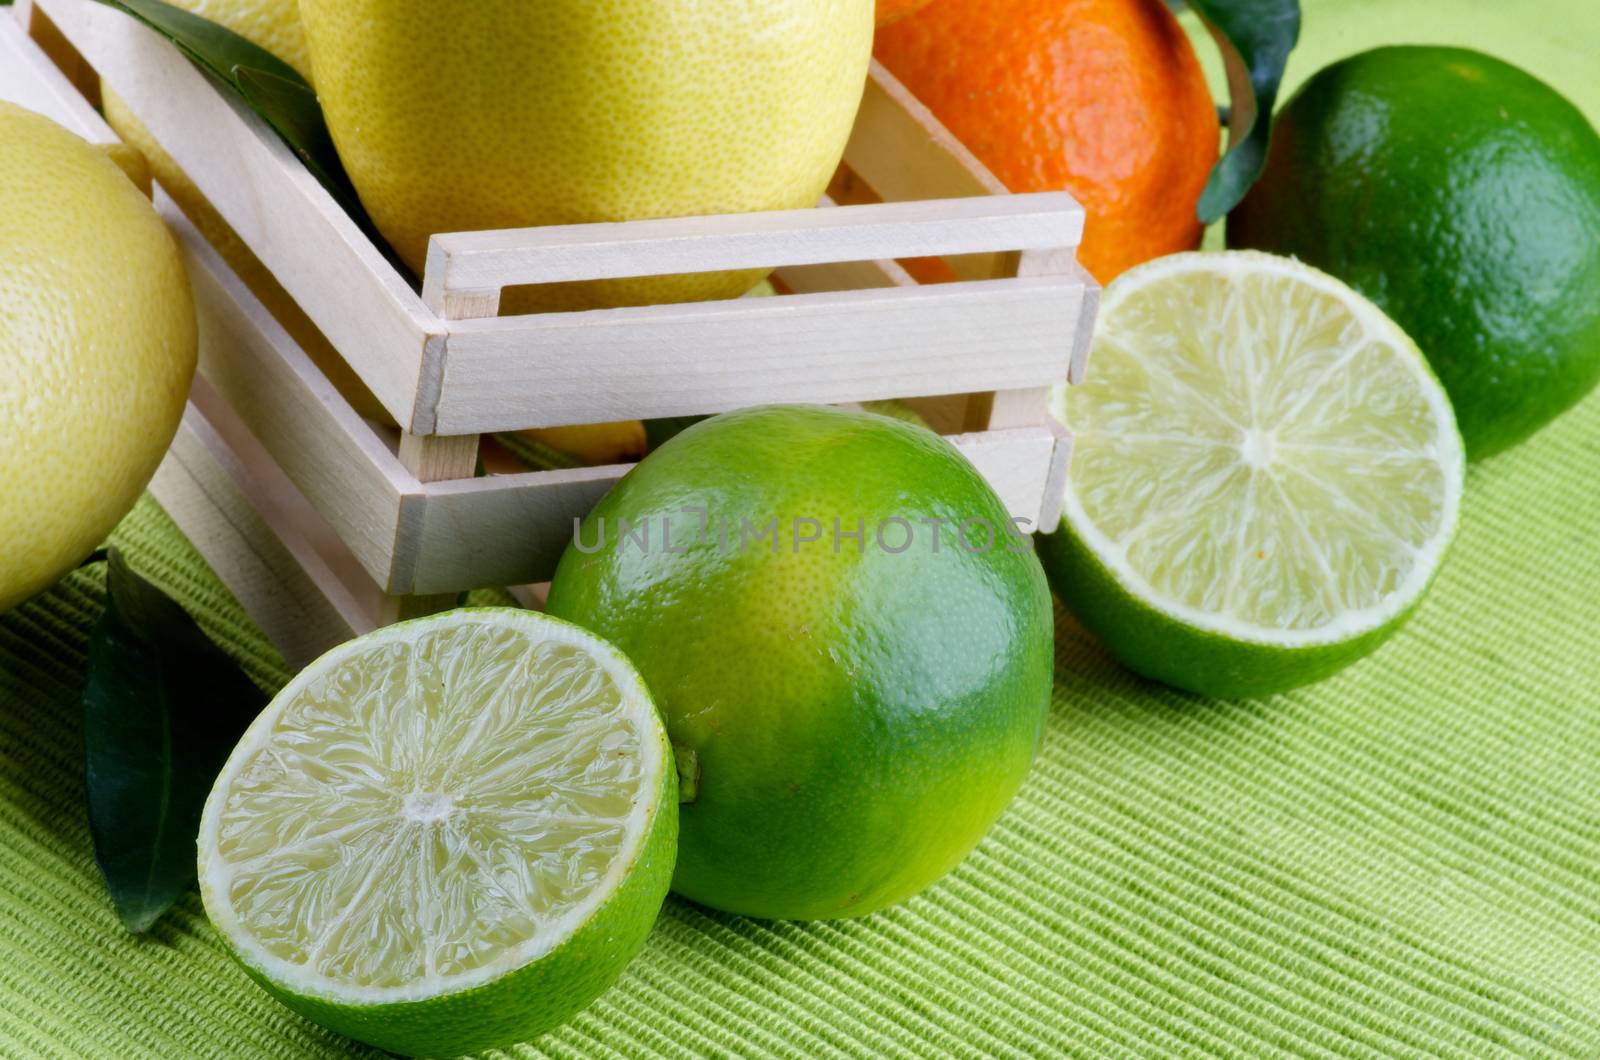 Heap of Various Citrus Fruits with Full Body Lemons, Tangerine and Limes Full Body and Halves in Wooden Box closeup on Green Napkin background